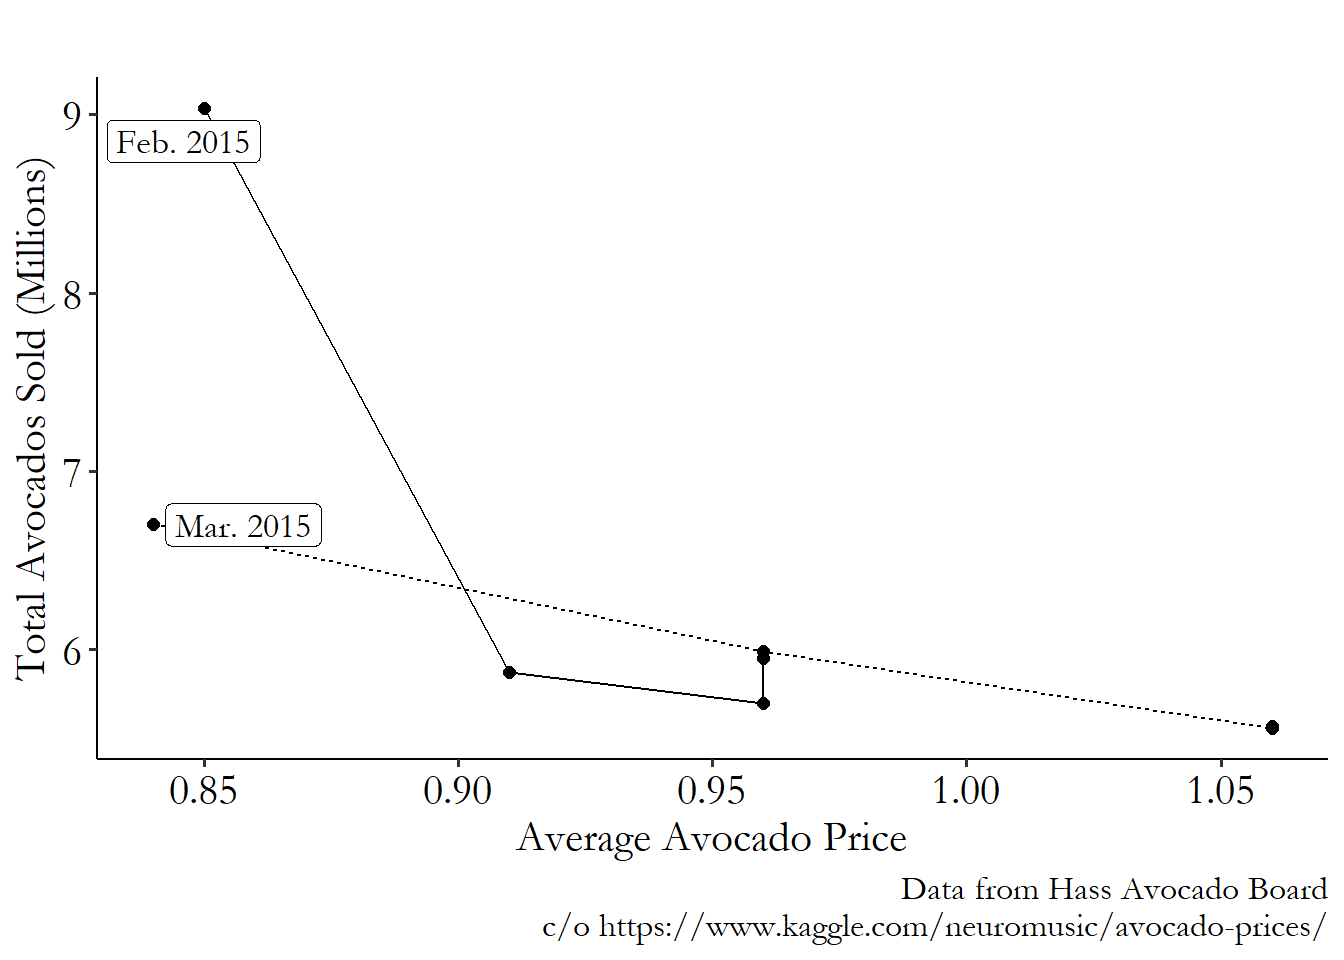 A scatterplot showing a negative relationship between total weekly sales of avocados in California and the average price of avocados through all of February and March 2015.